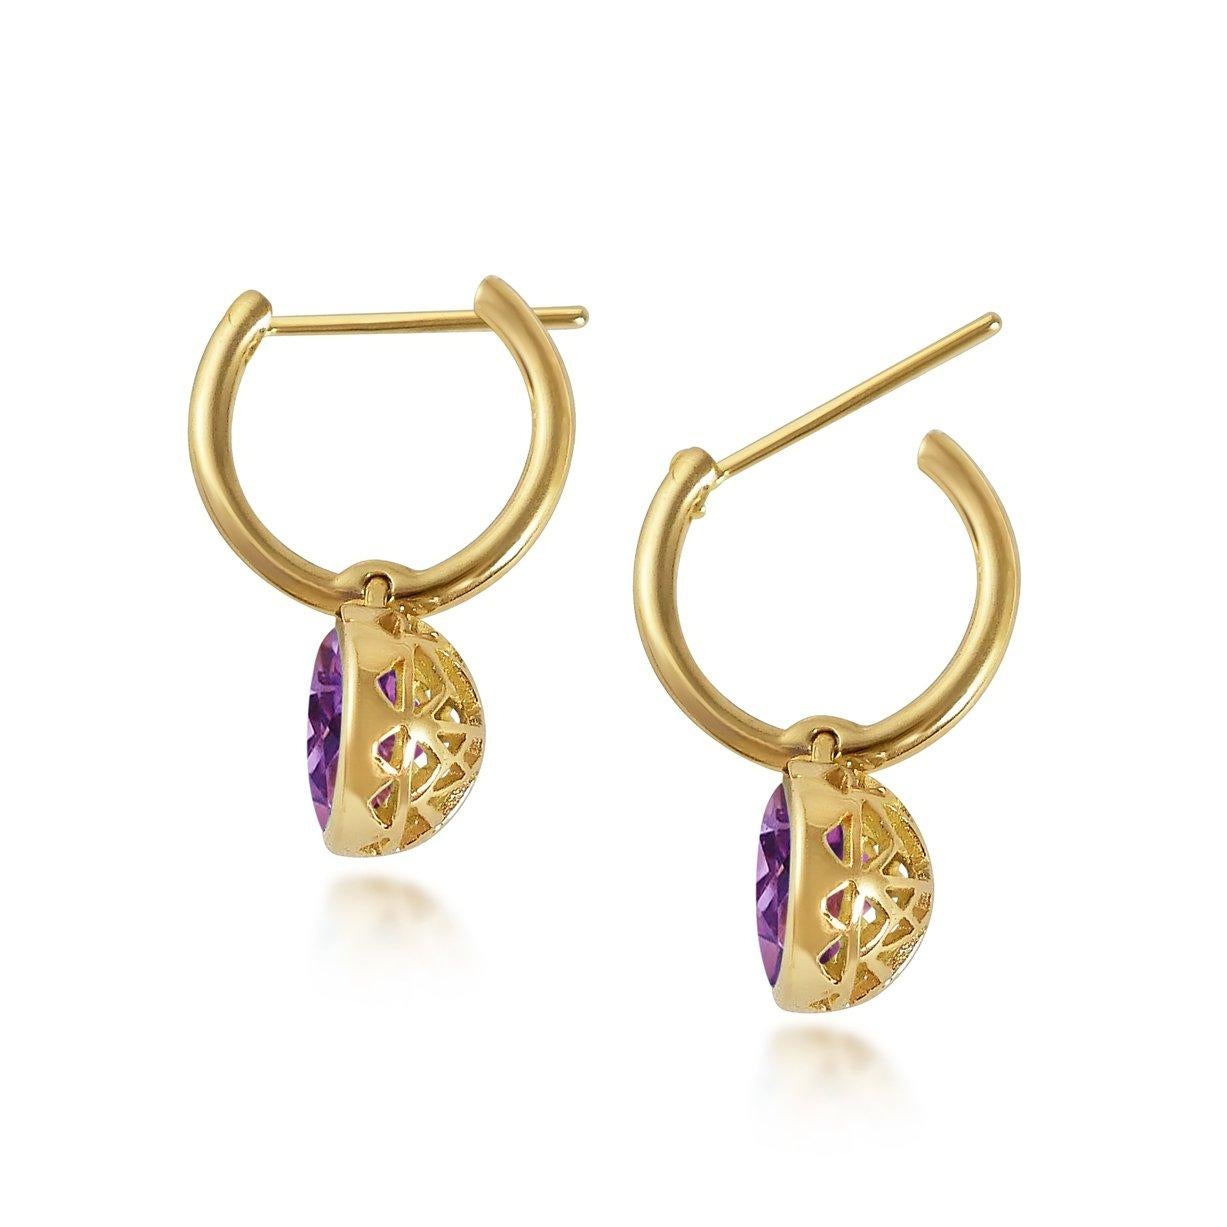 Handcrafted 2.40 Carats Amethyst 18 Karat Yellow Gold Drop Earrings. The 8mm natural stones are set in our iconic hand pierced gold lace to let the light through. Our precious and fine stones on our dangling earrings are highlighted by a diamond on